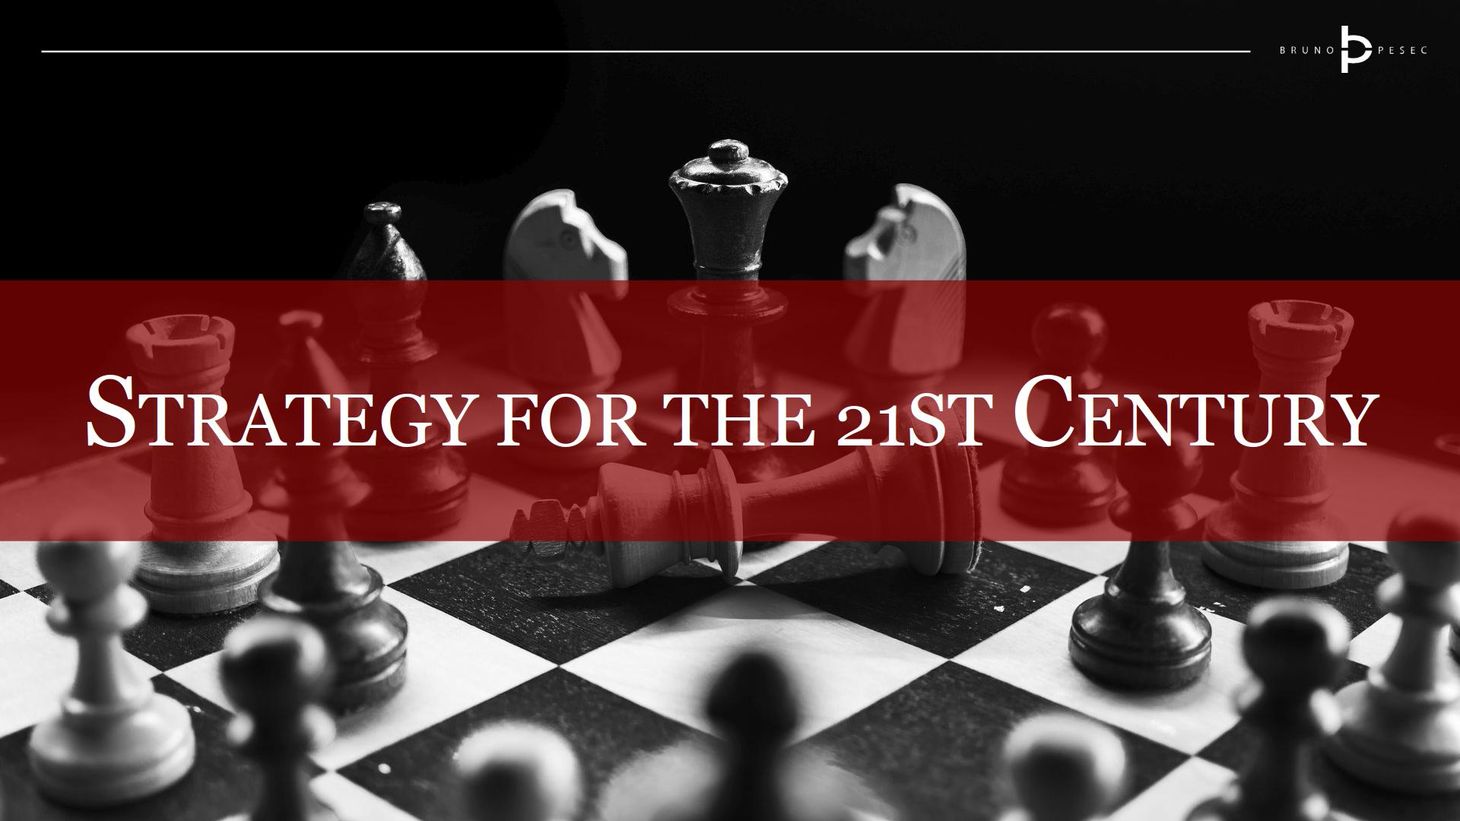 Strategy for the 21st century